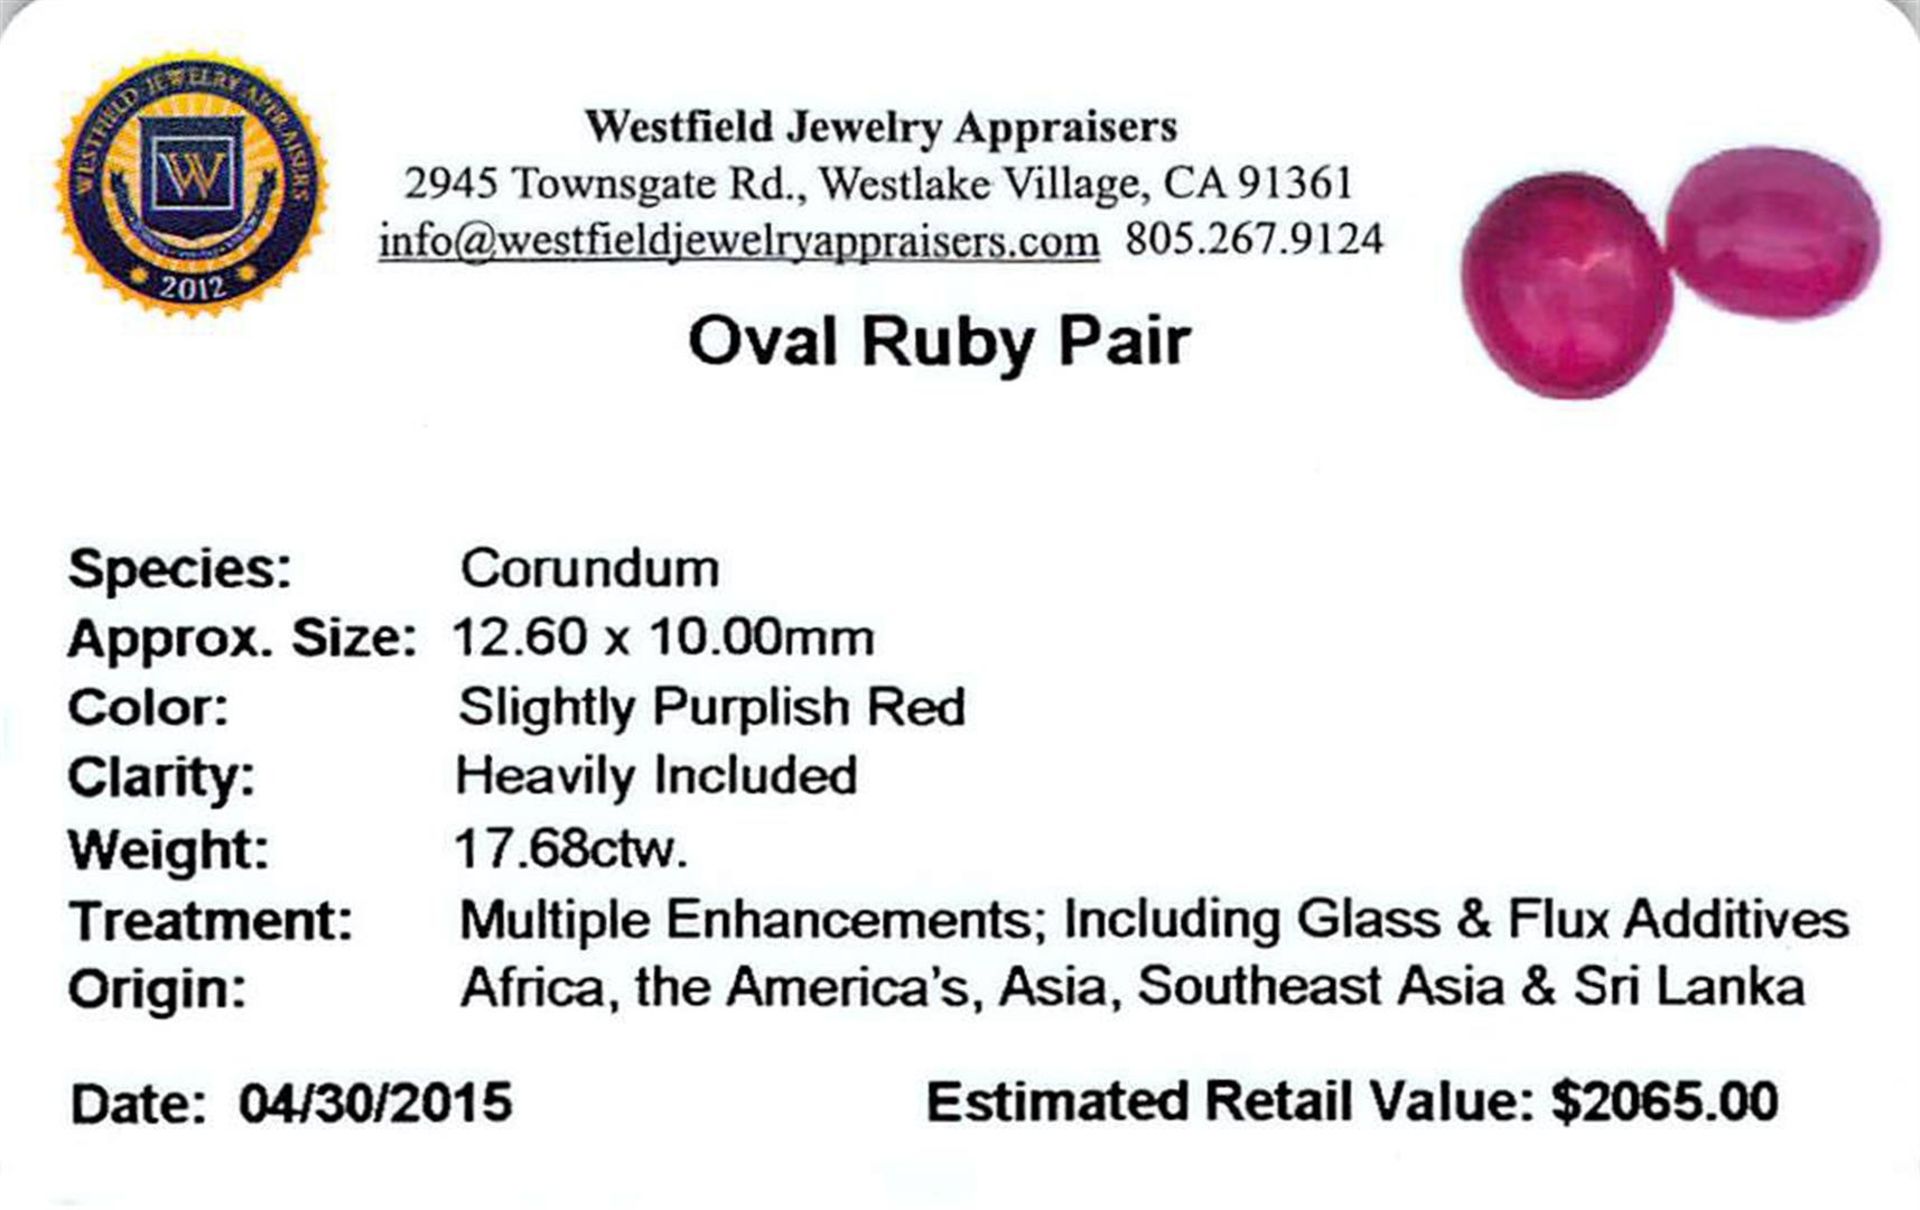 17.68 ctw Oval Mixed Ruby Parcel - Image 2 of 2